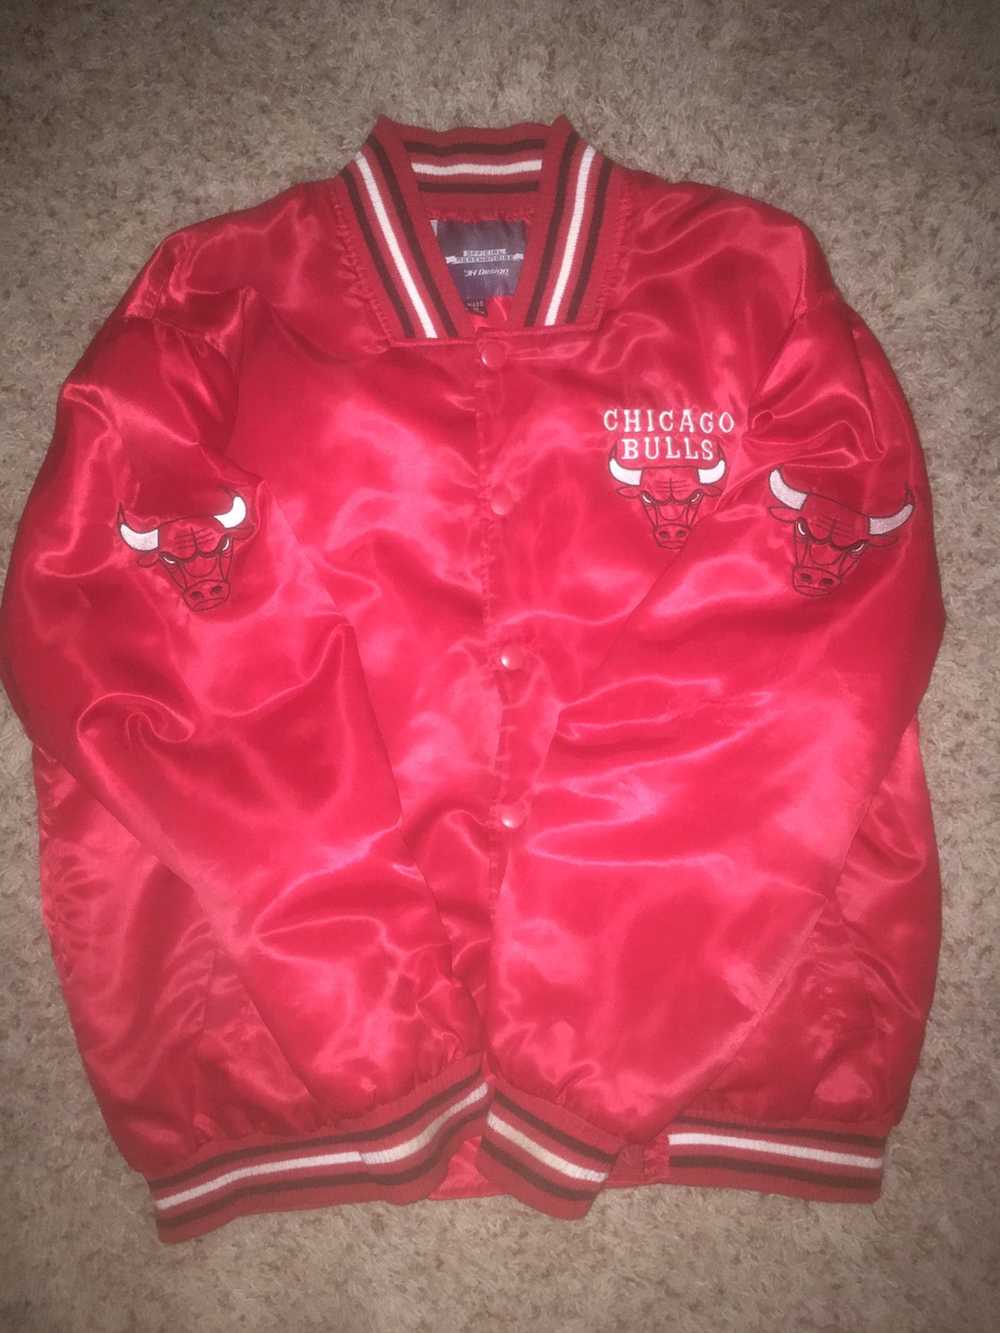 NBA Chicago Bulls Jacket by JH Design Group - image 1